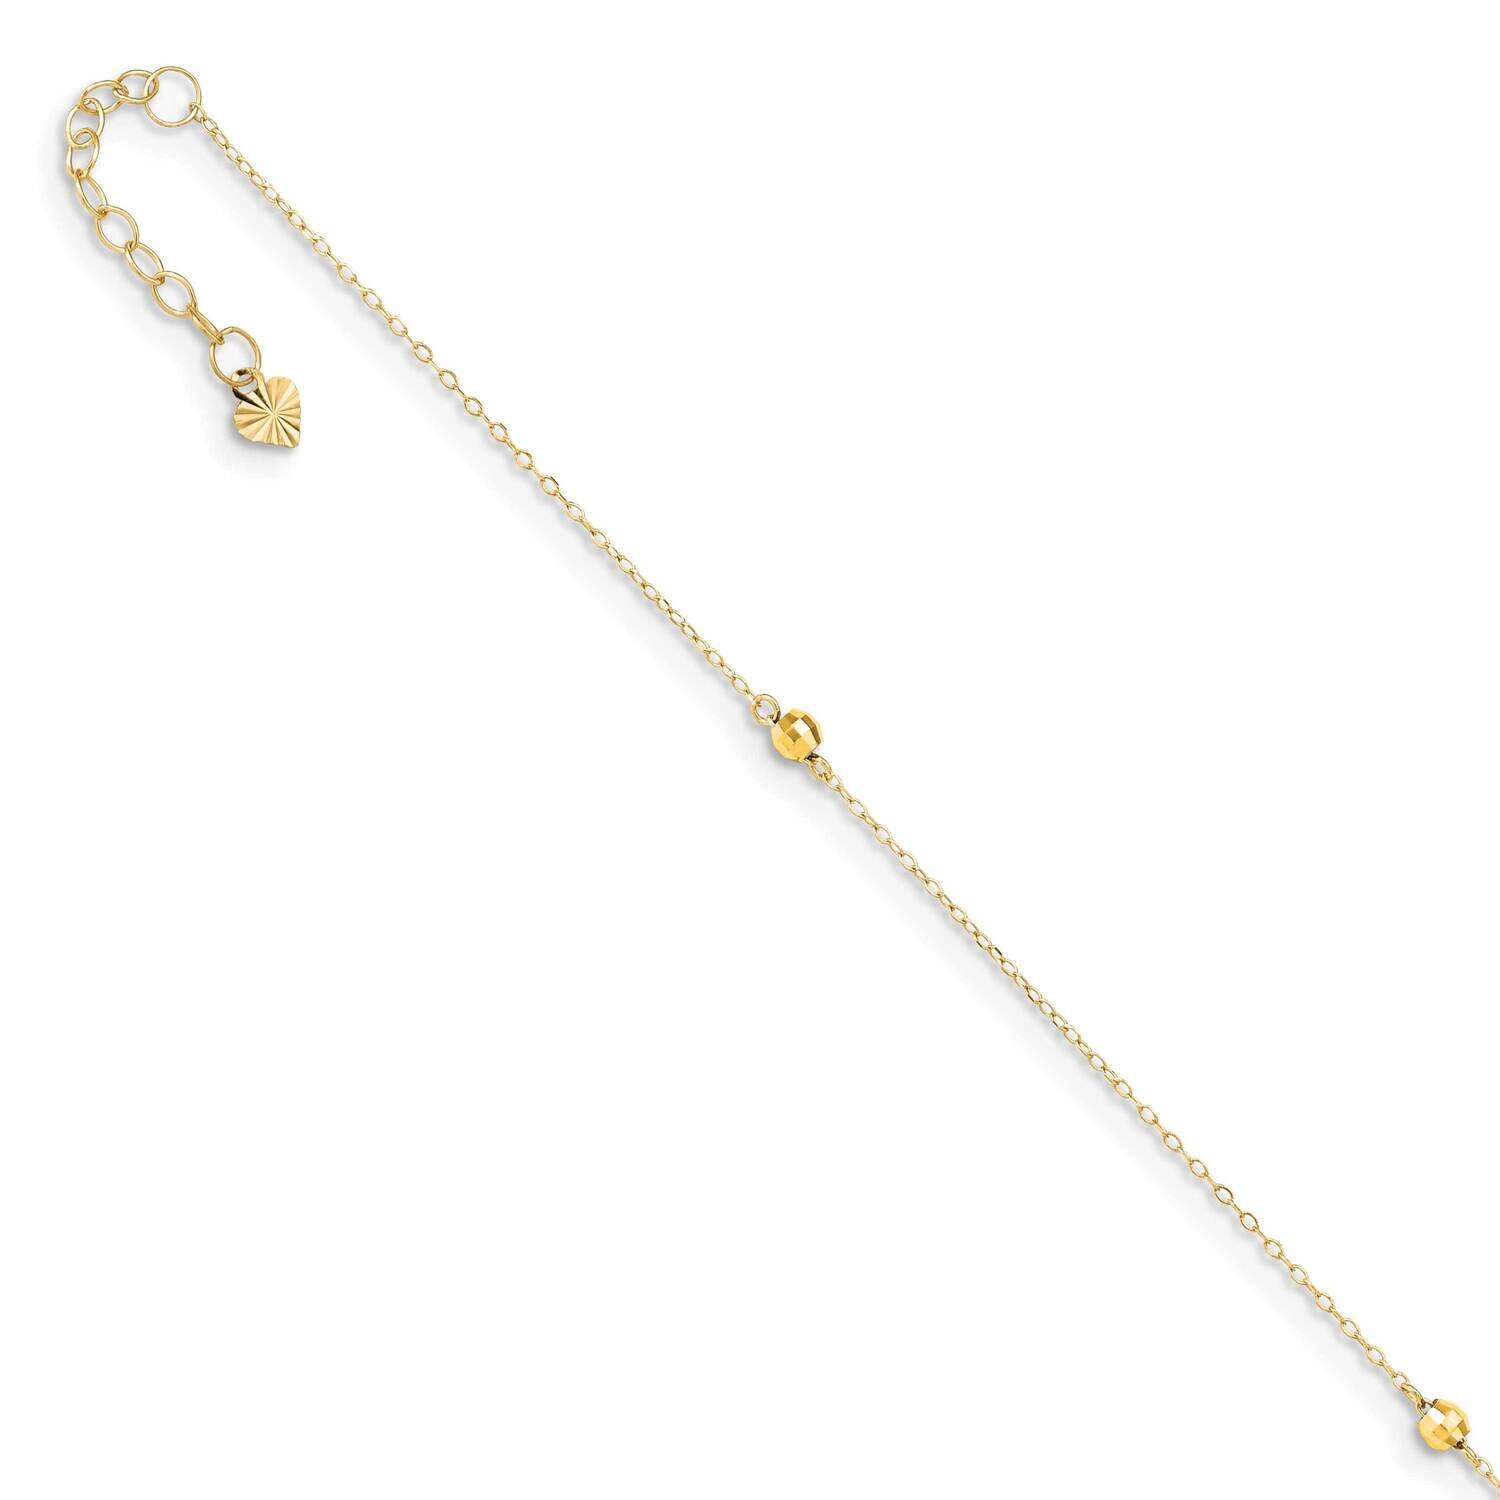 Mirror Beads 9 Inch Plus 1 Inch Extender Anklet 14k Gold ANK326-9